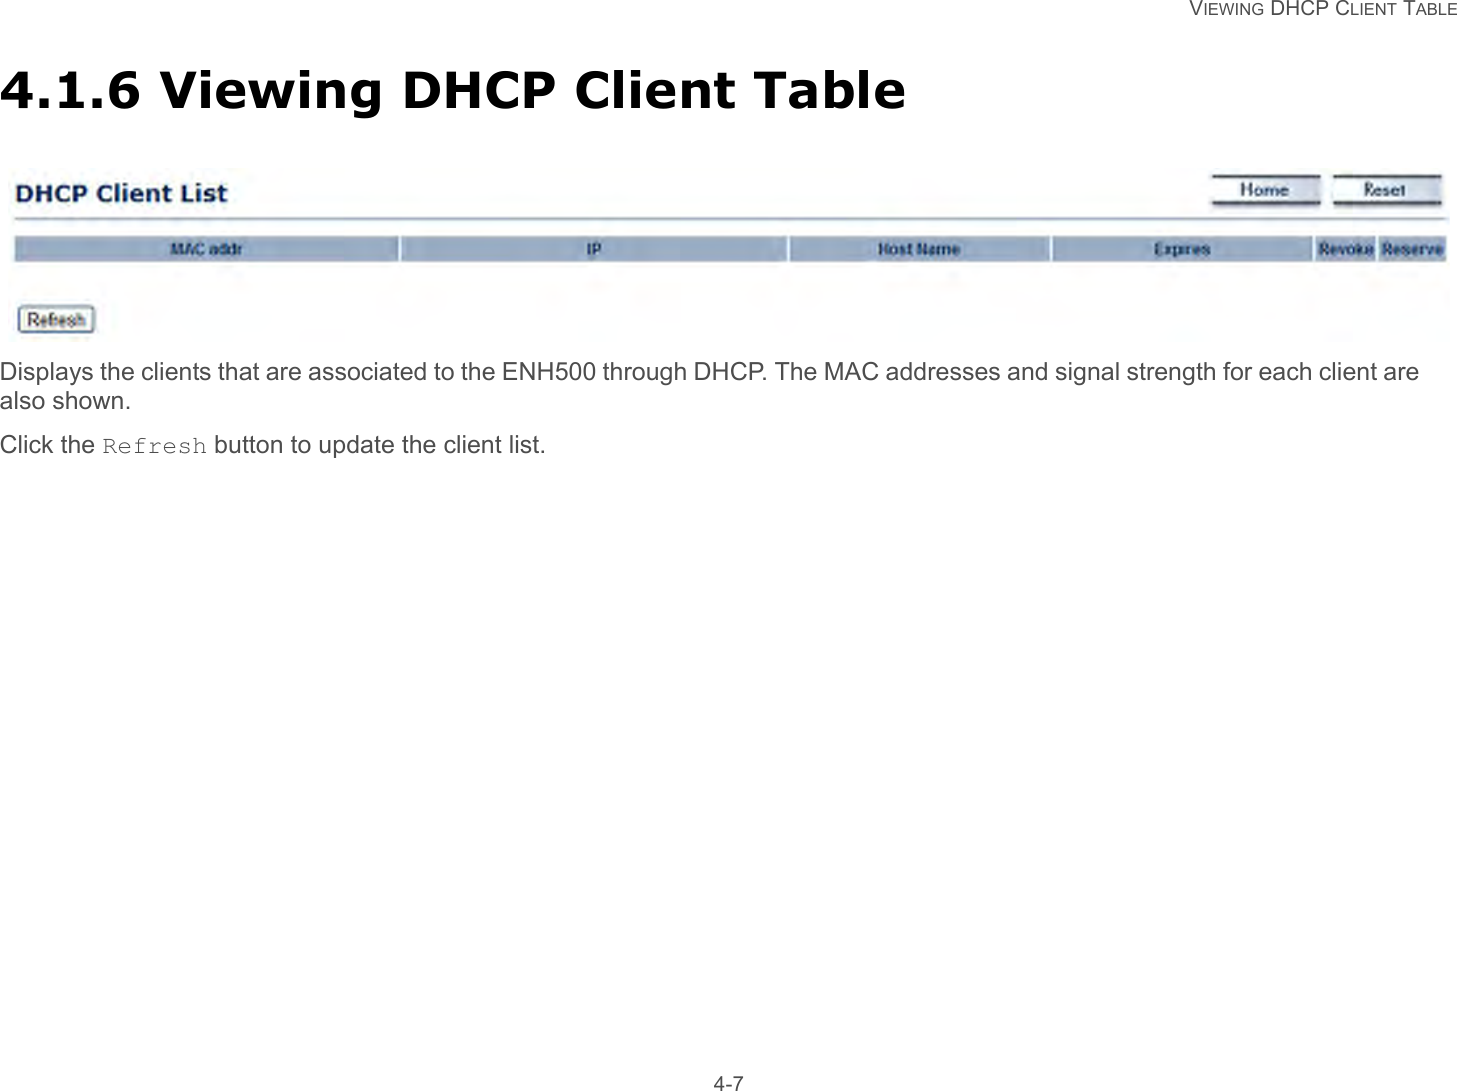   VIEWING DHCP CLIENT TABLE 4-74.1.6 Viewing DHCP Client TableDisplays the clients that are associated to the ENH500 through DHCP. The MAC addresses and signal strength for each client are also shown.Click the Refresh button to update the client list.